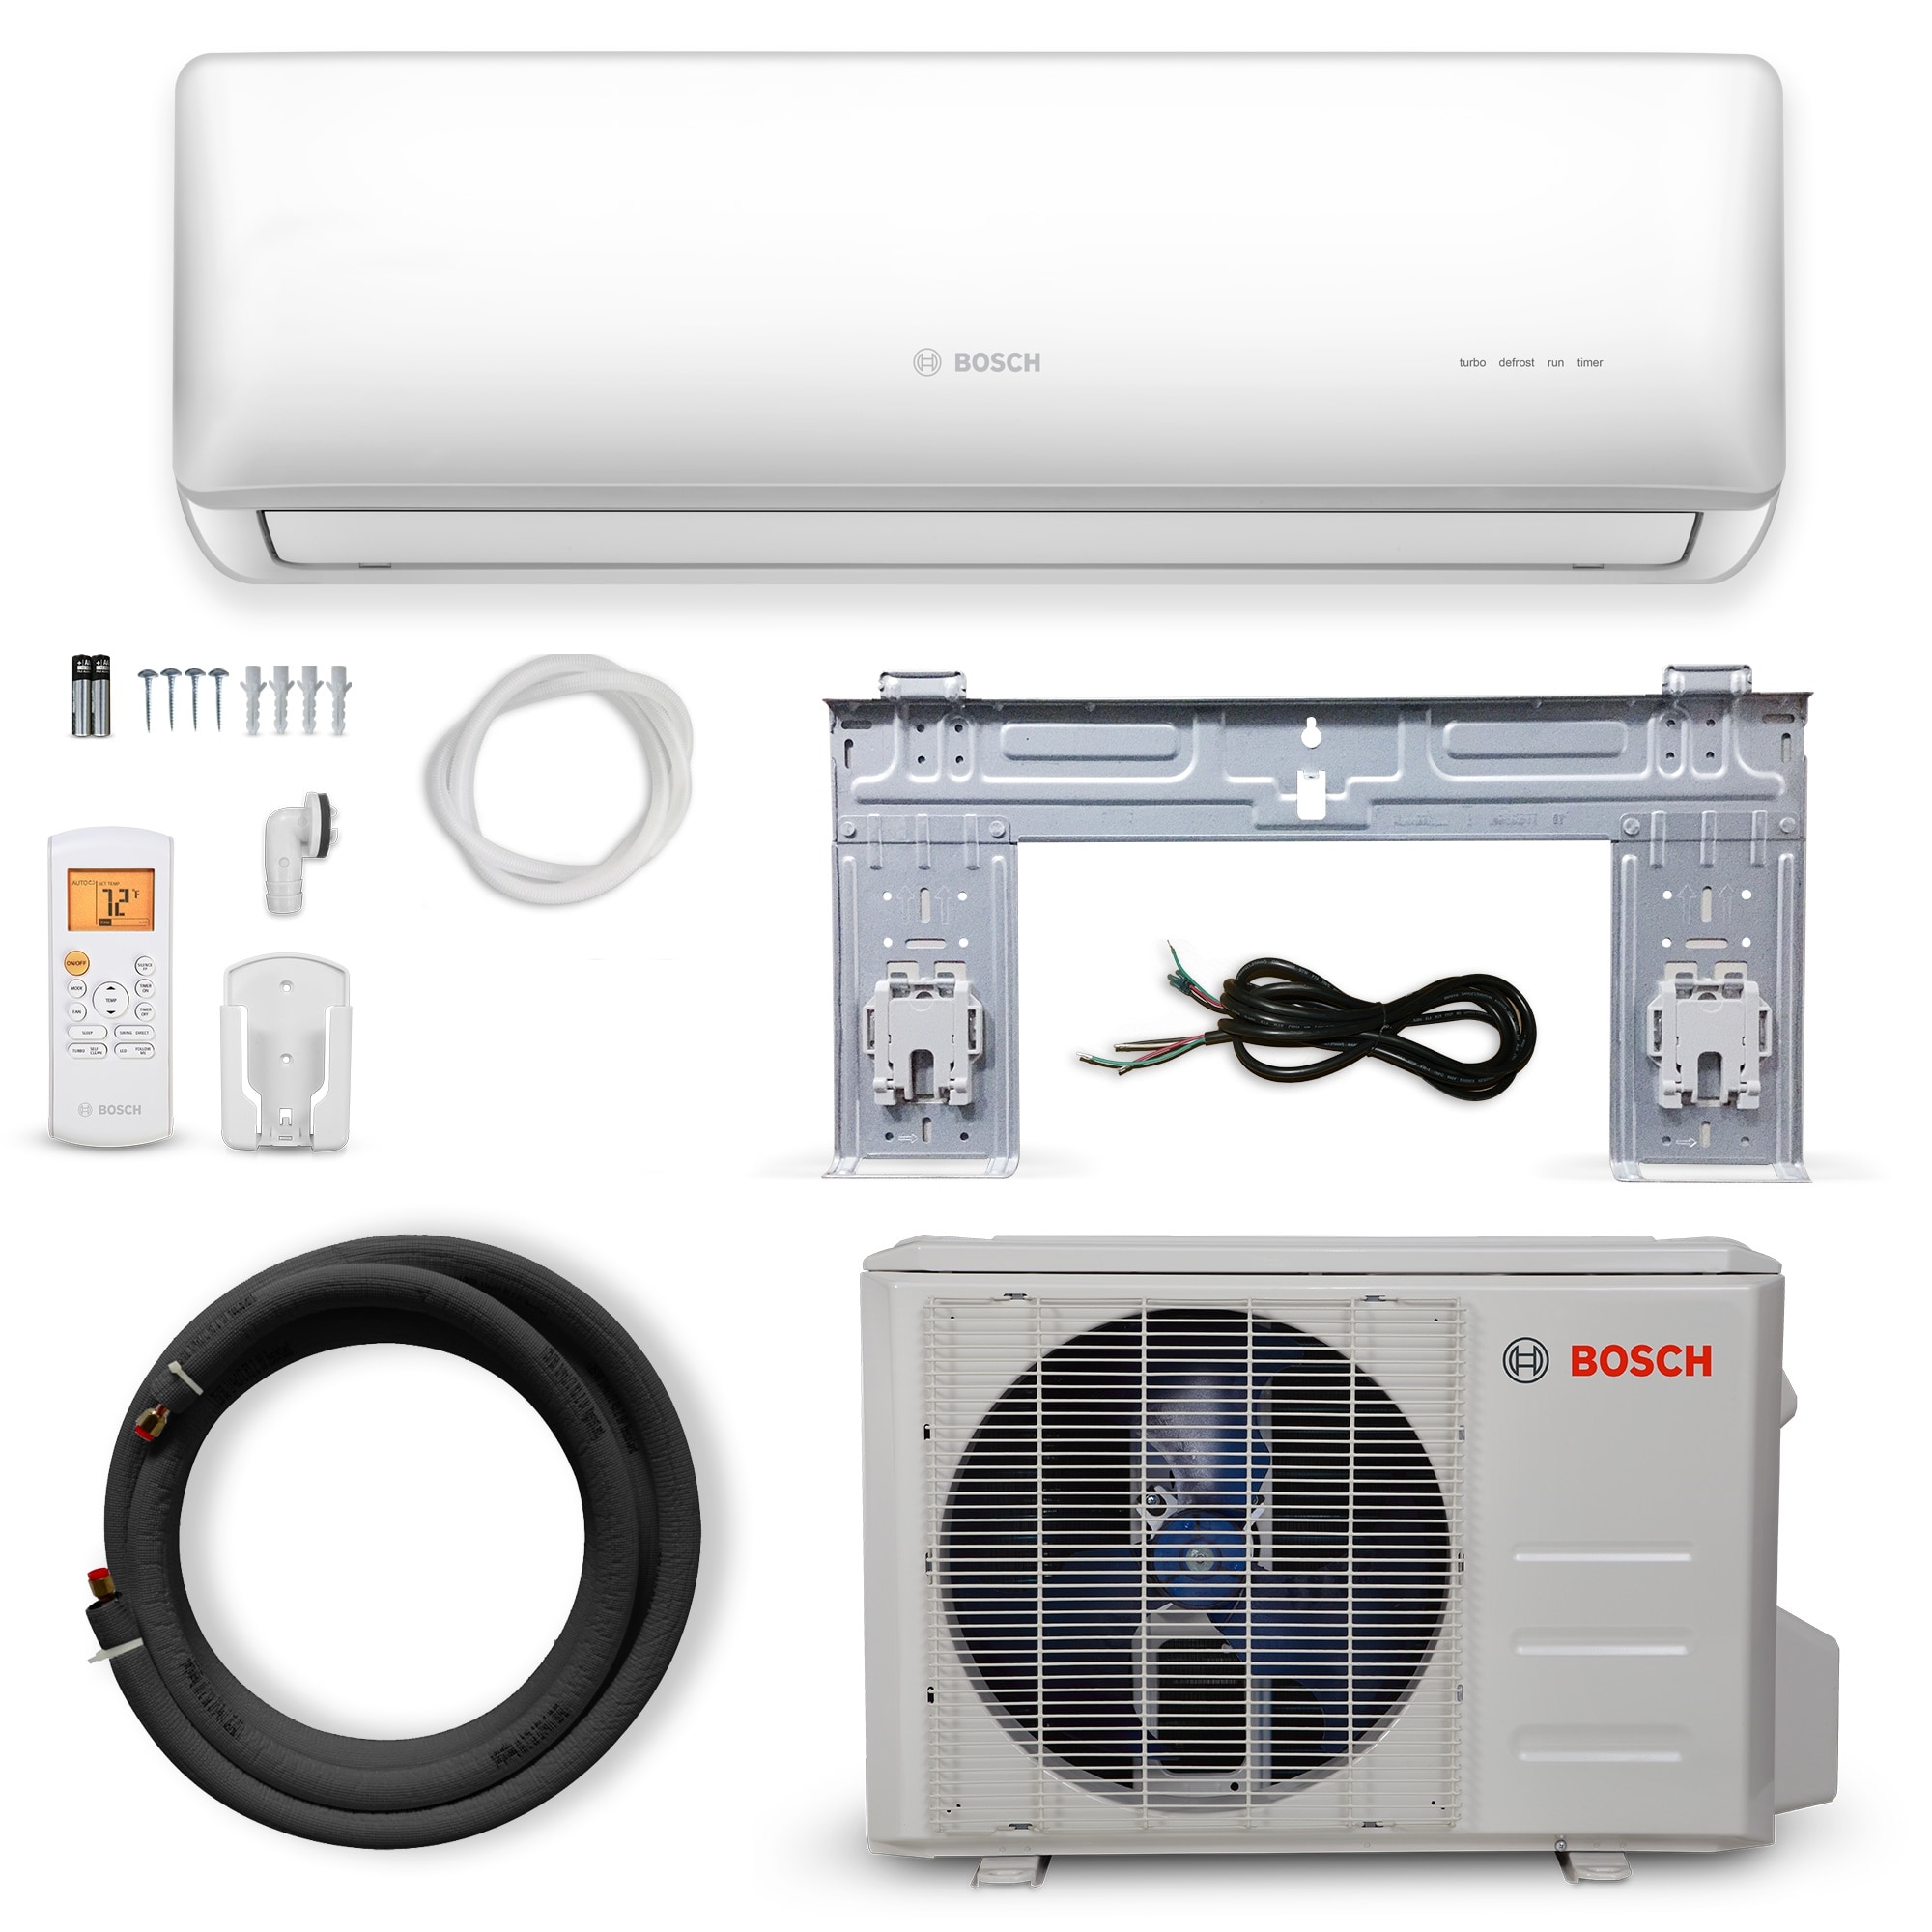 Mini VRF air conditioning systems from Bosch